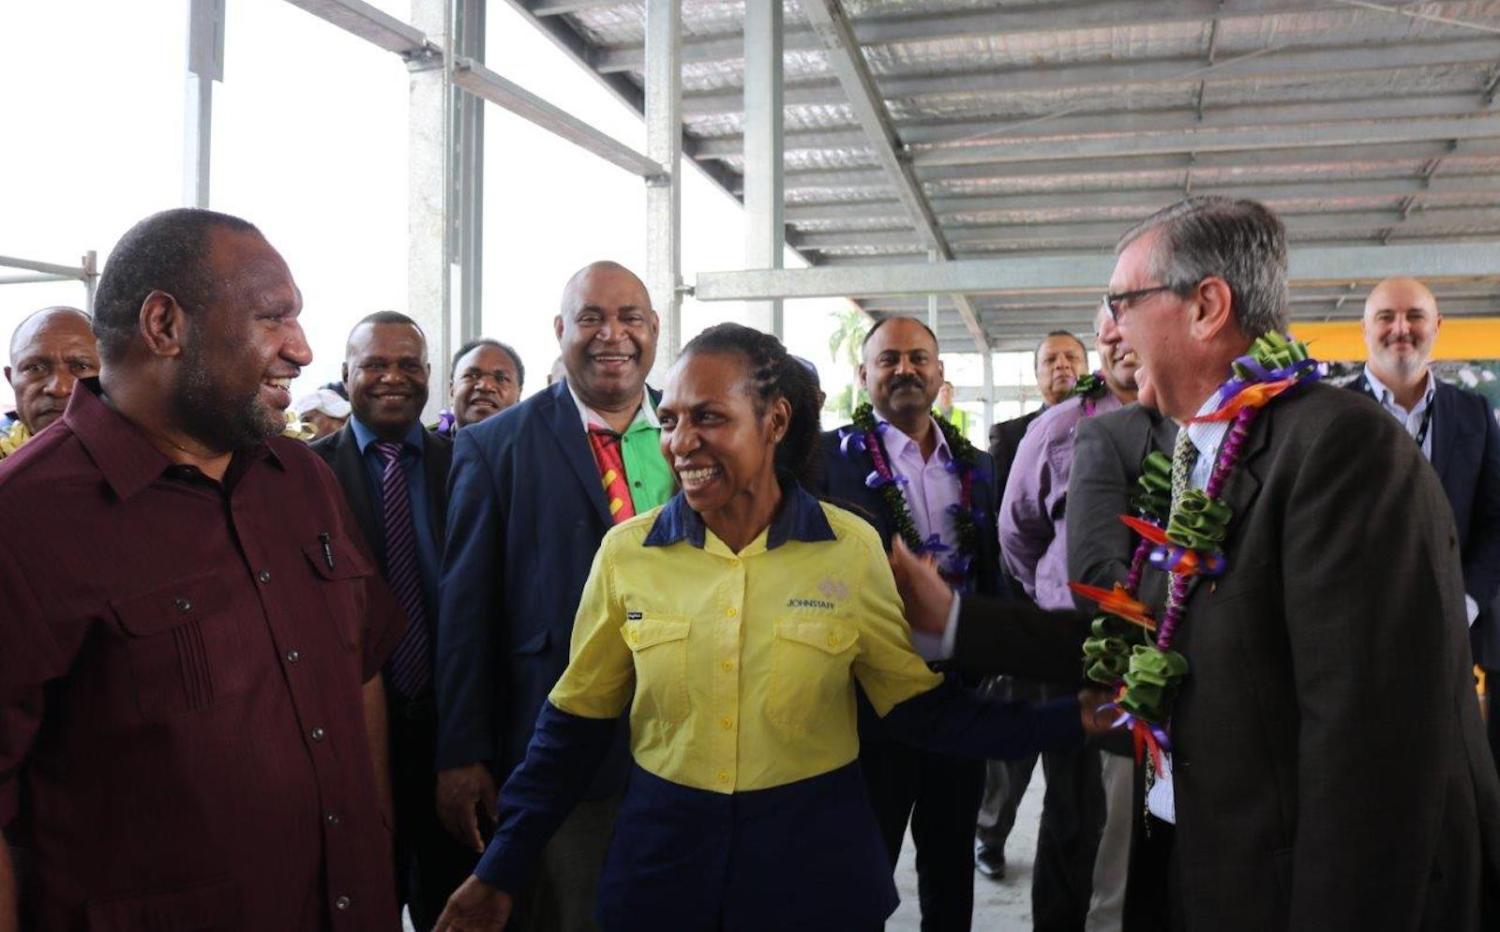 Women show themselves as leaders in PNG’s development despite a lack of reflection in politics. Melinda Kanamon briefs on the Angau Redevelopment Project to PM James Marape and Australian High Commissioner Bruce Davis (Photo: Johnstaff International)